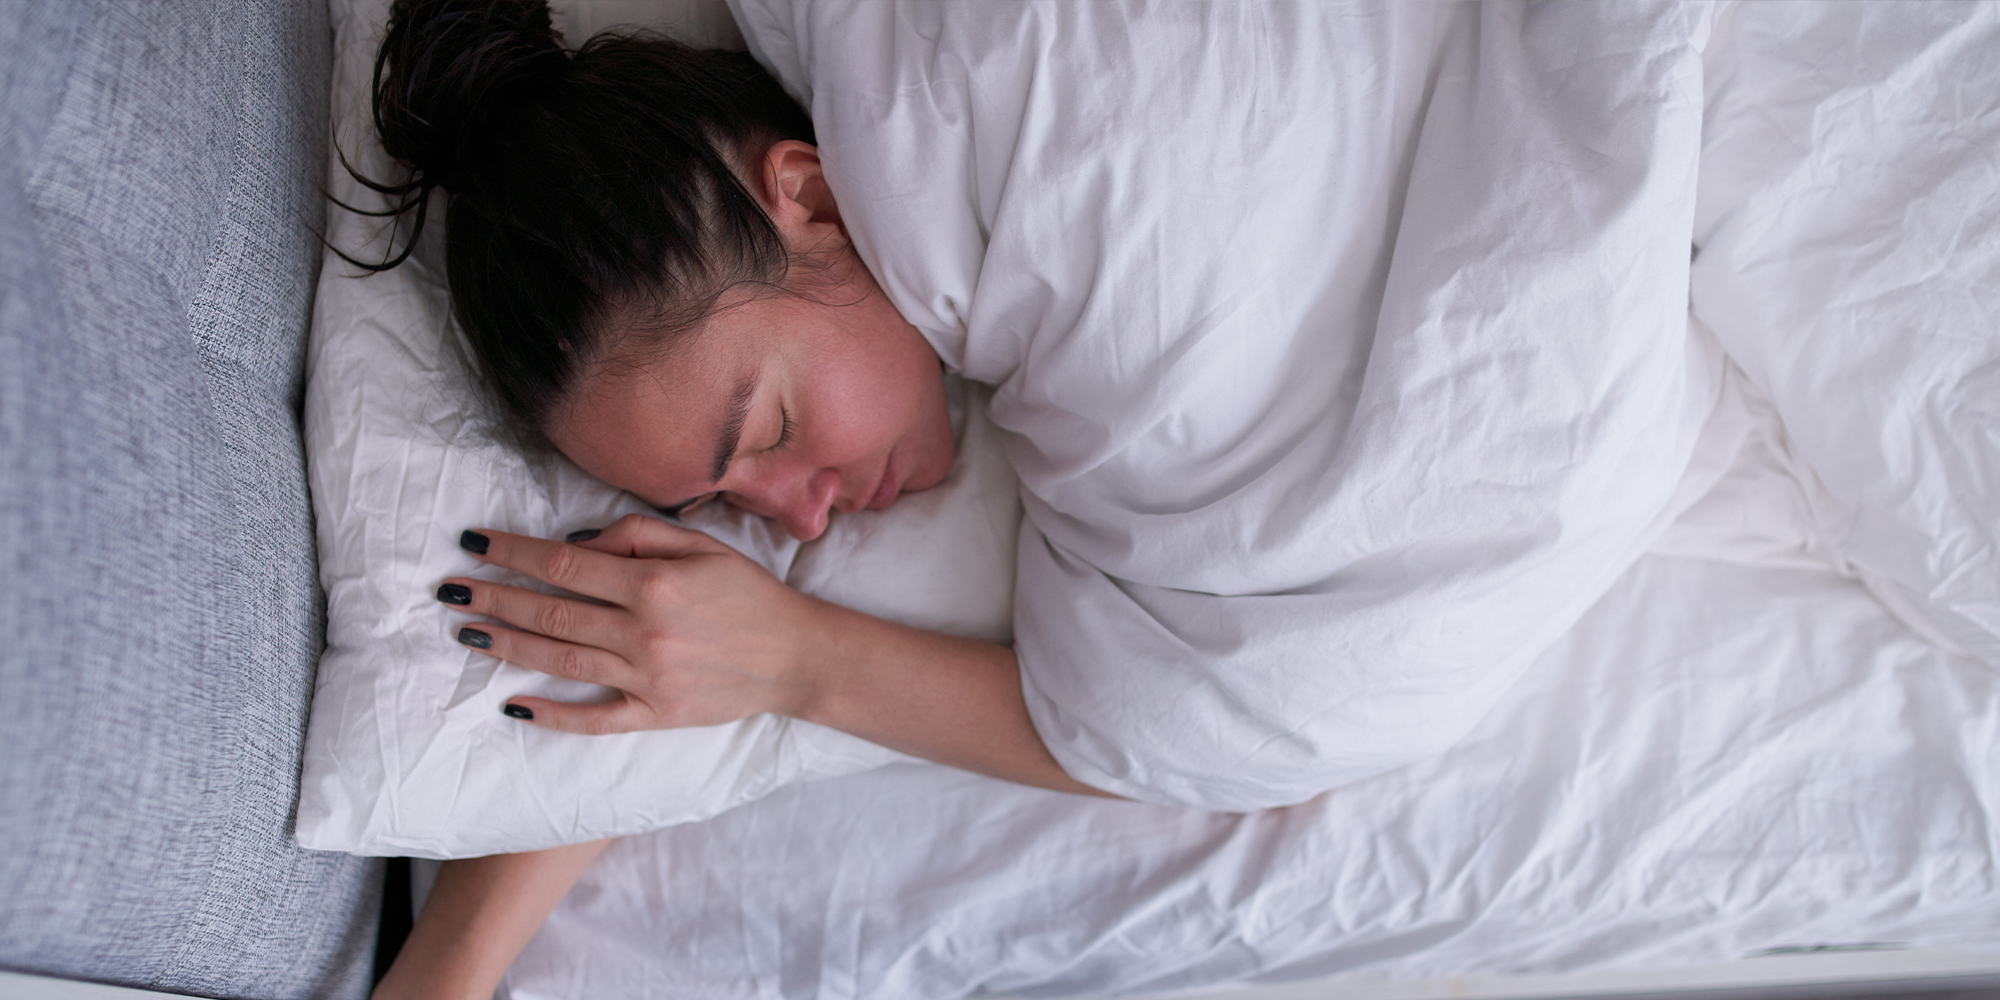 Restful Revelations: What Our Sleep Positions Could Tell Us About